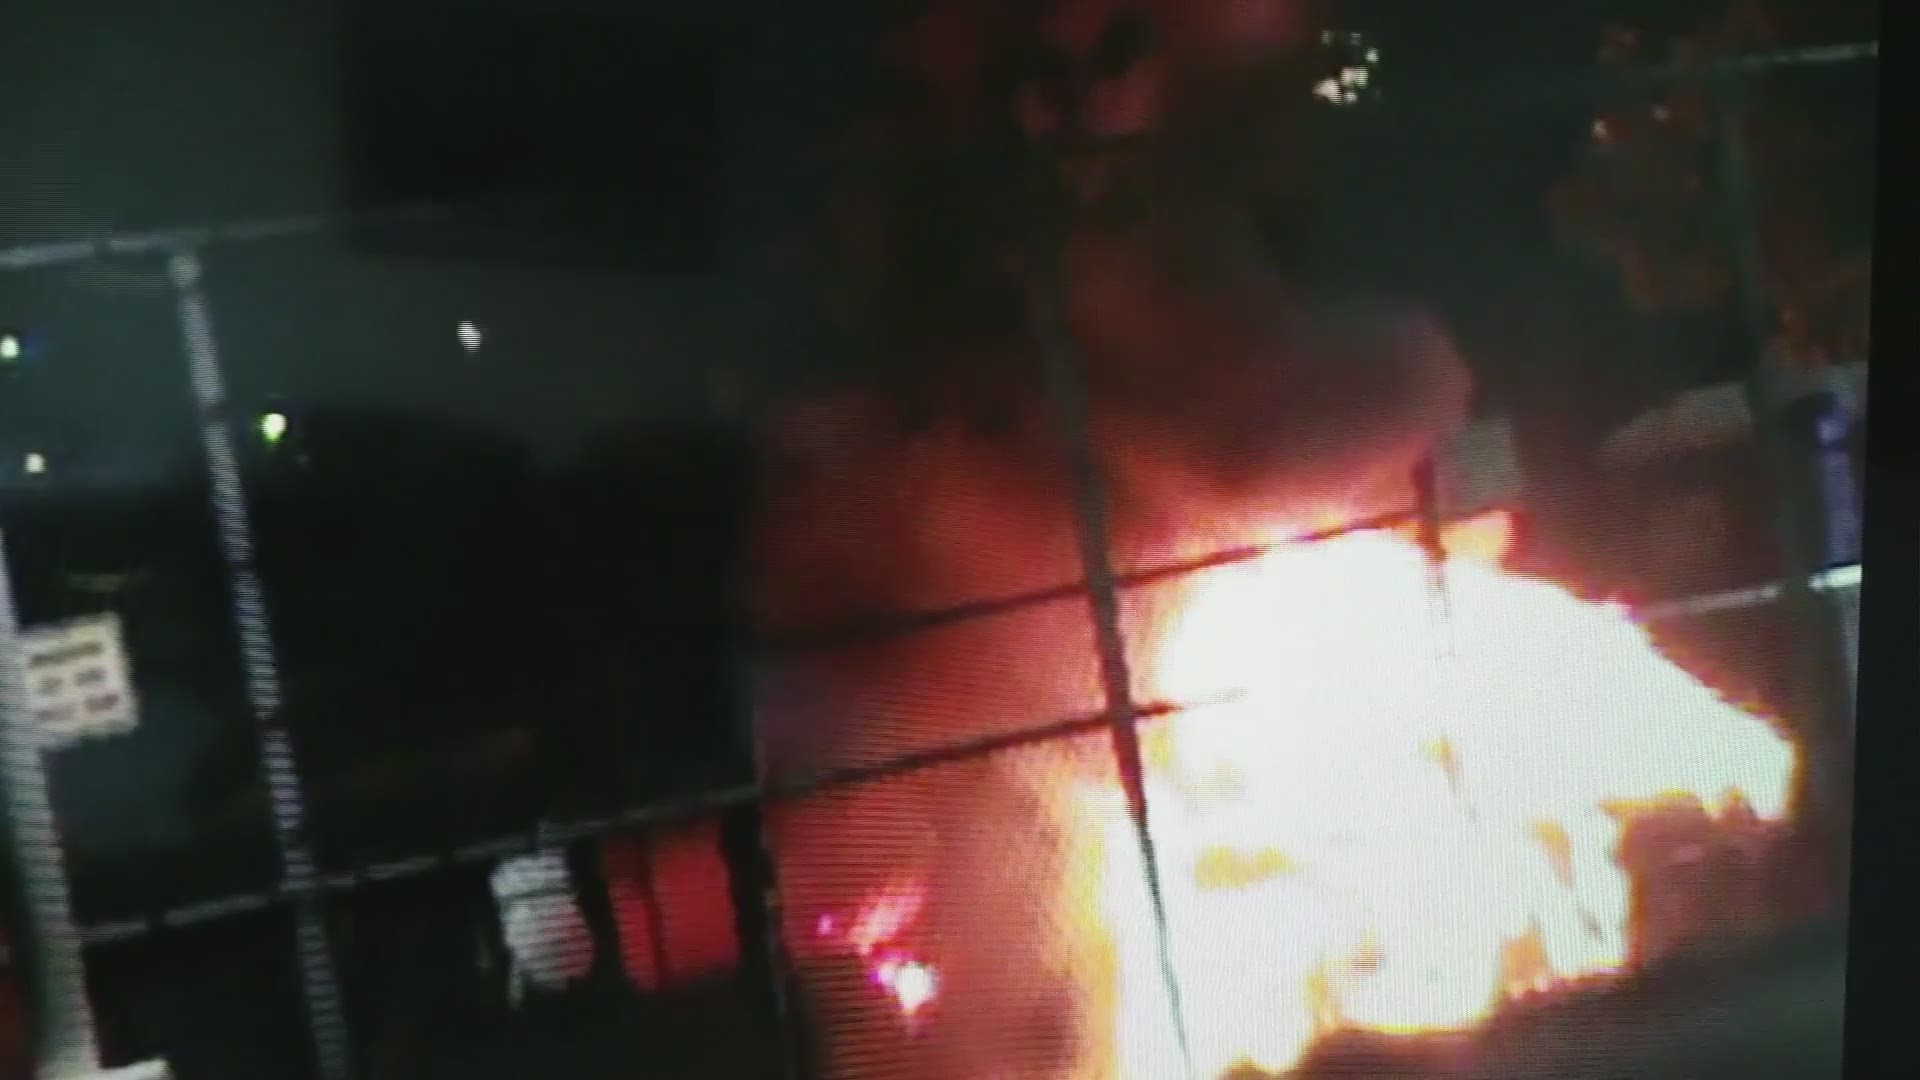 Newly released surveillance video shows a car exploding and the sounds of gunfire during an attack outside a migrant detention center in Tacoma.